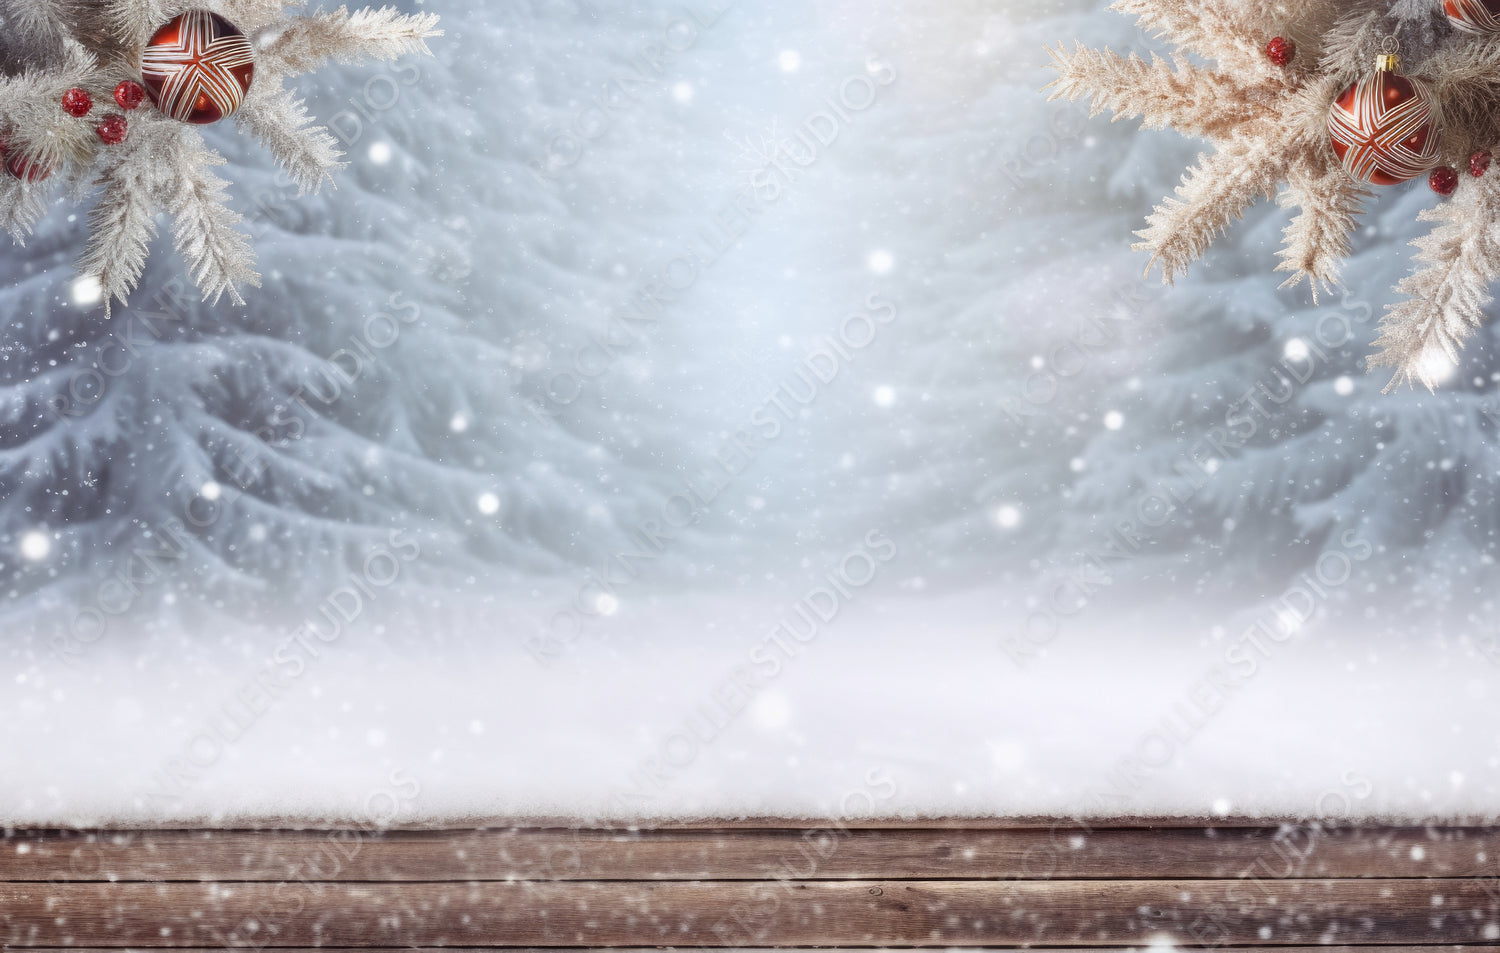 Winter christmas scenic landscape background with copy space. Wooden flooring covered with snow in forest and Christmas tree on nature.